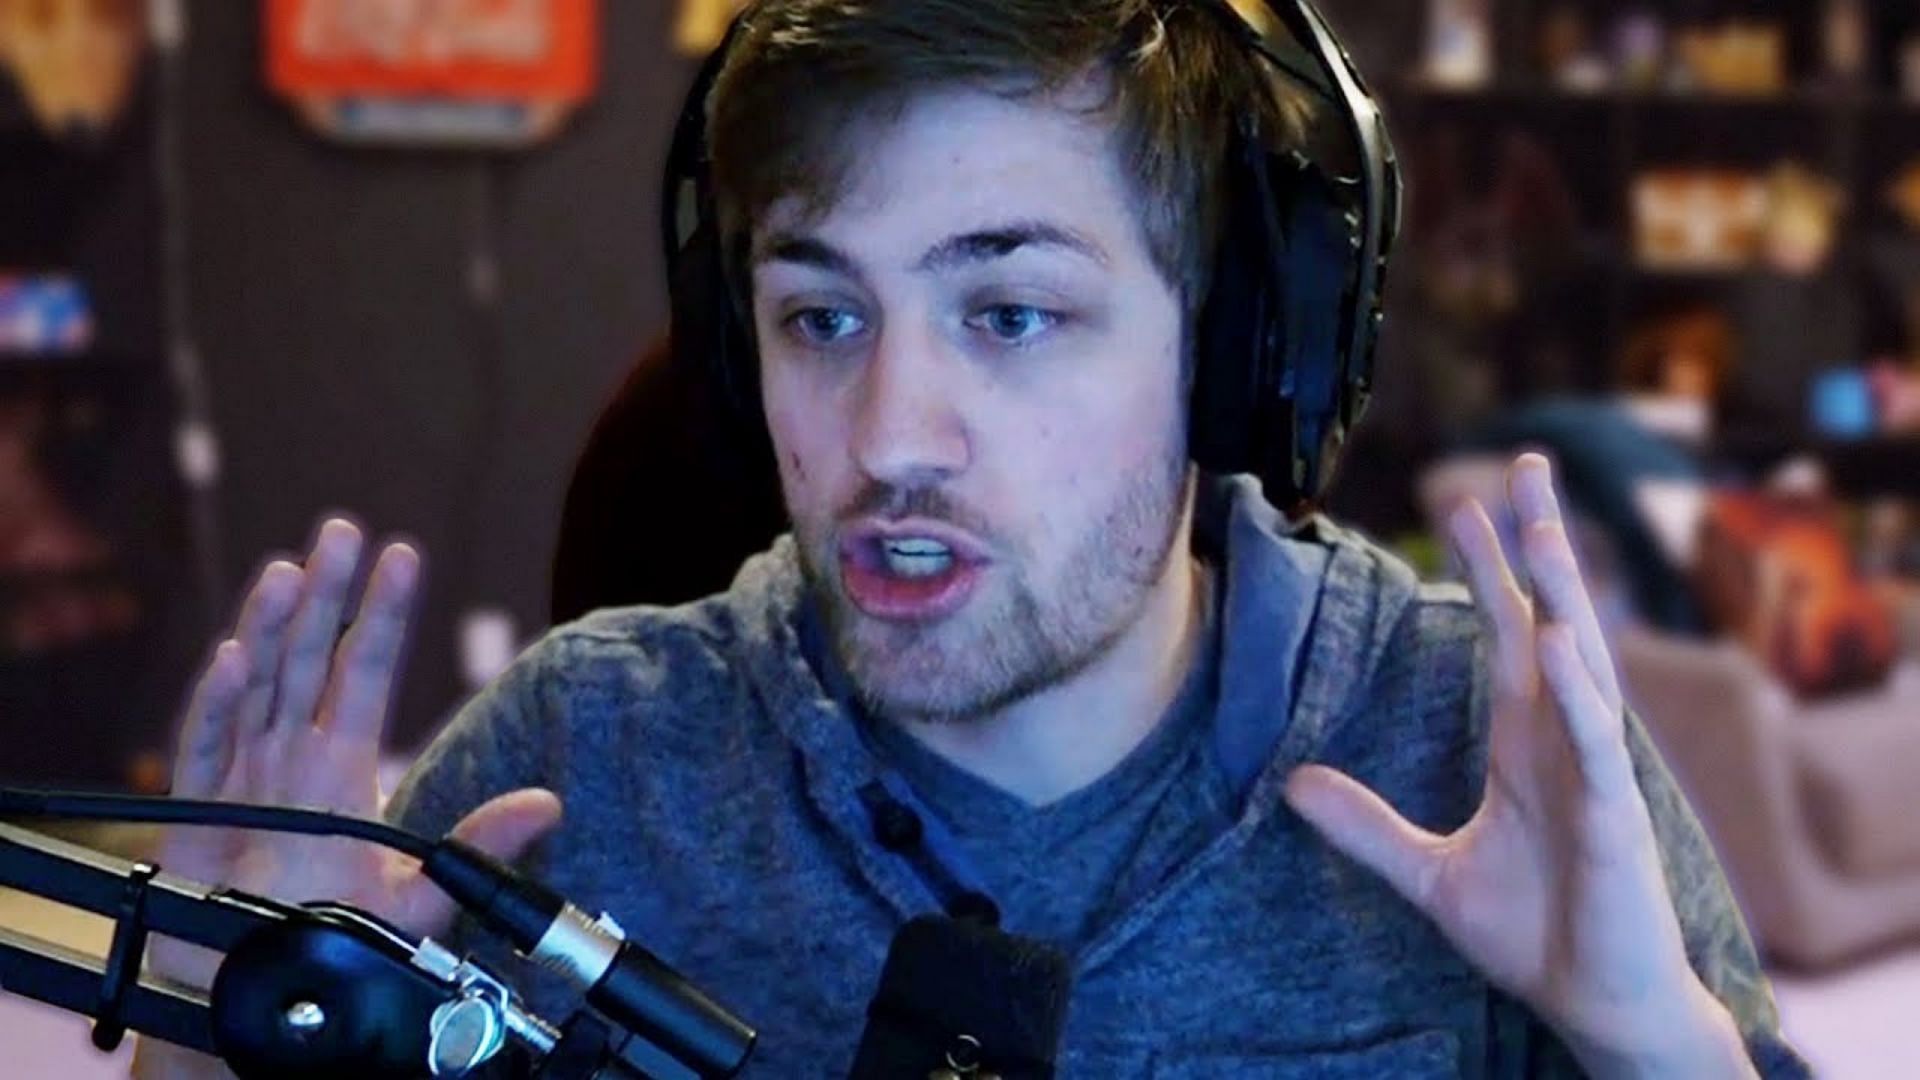 Chance &quot;Sodapoppin&quot; Norris has once again been banned from Twitch (image via Twitch/Sodapoppin)